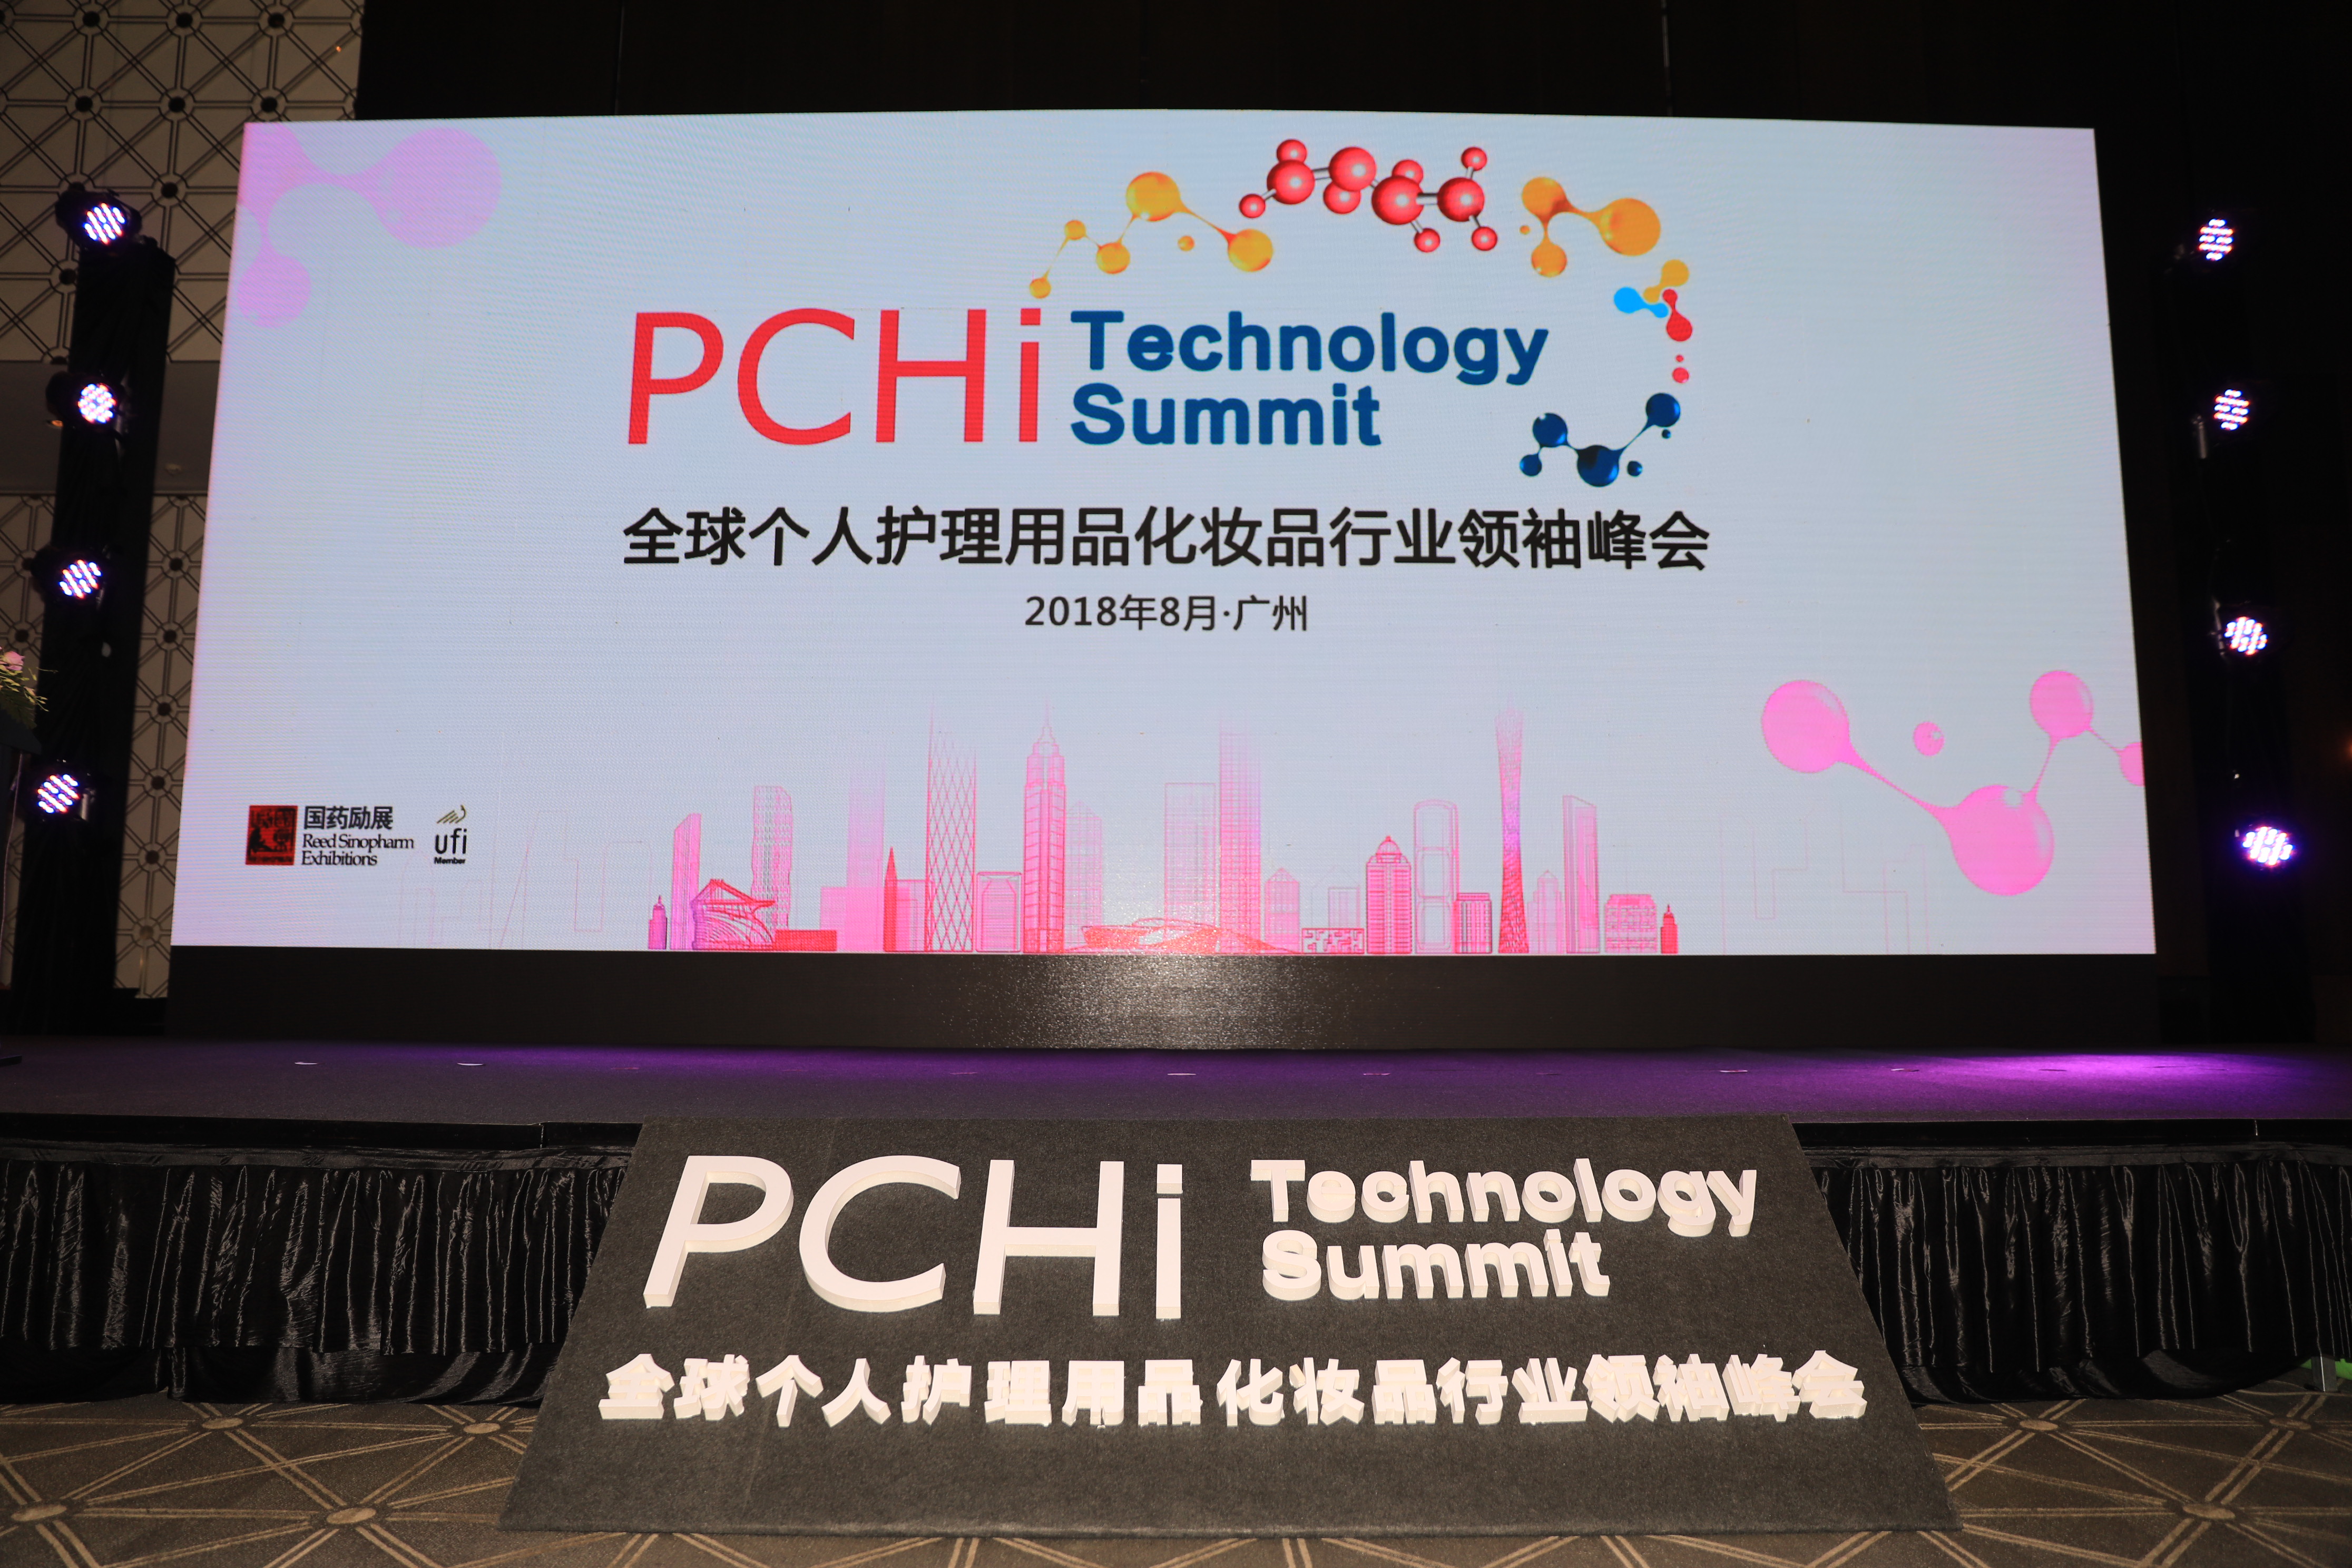 PCHi 2019: Trendspotting Amongst Attendees’ Top Objectives